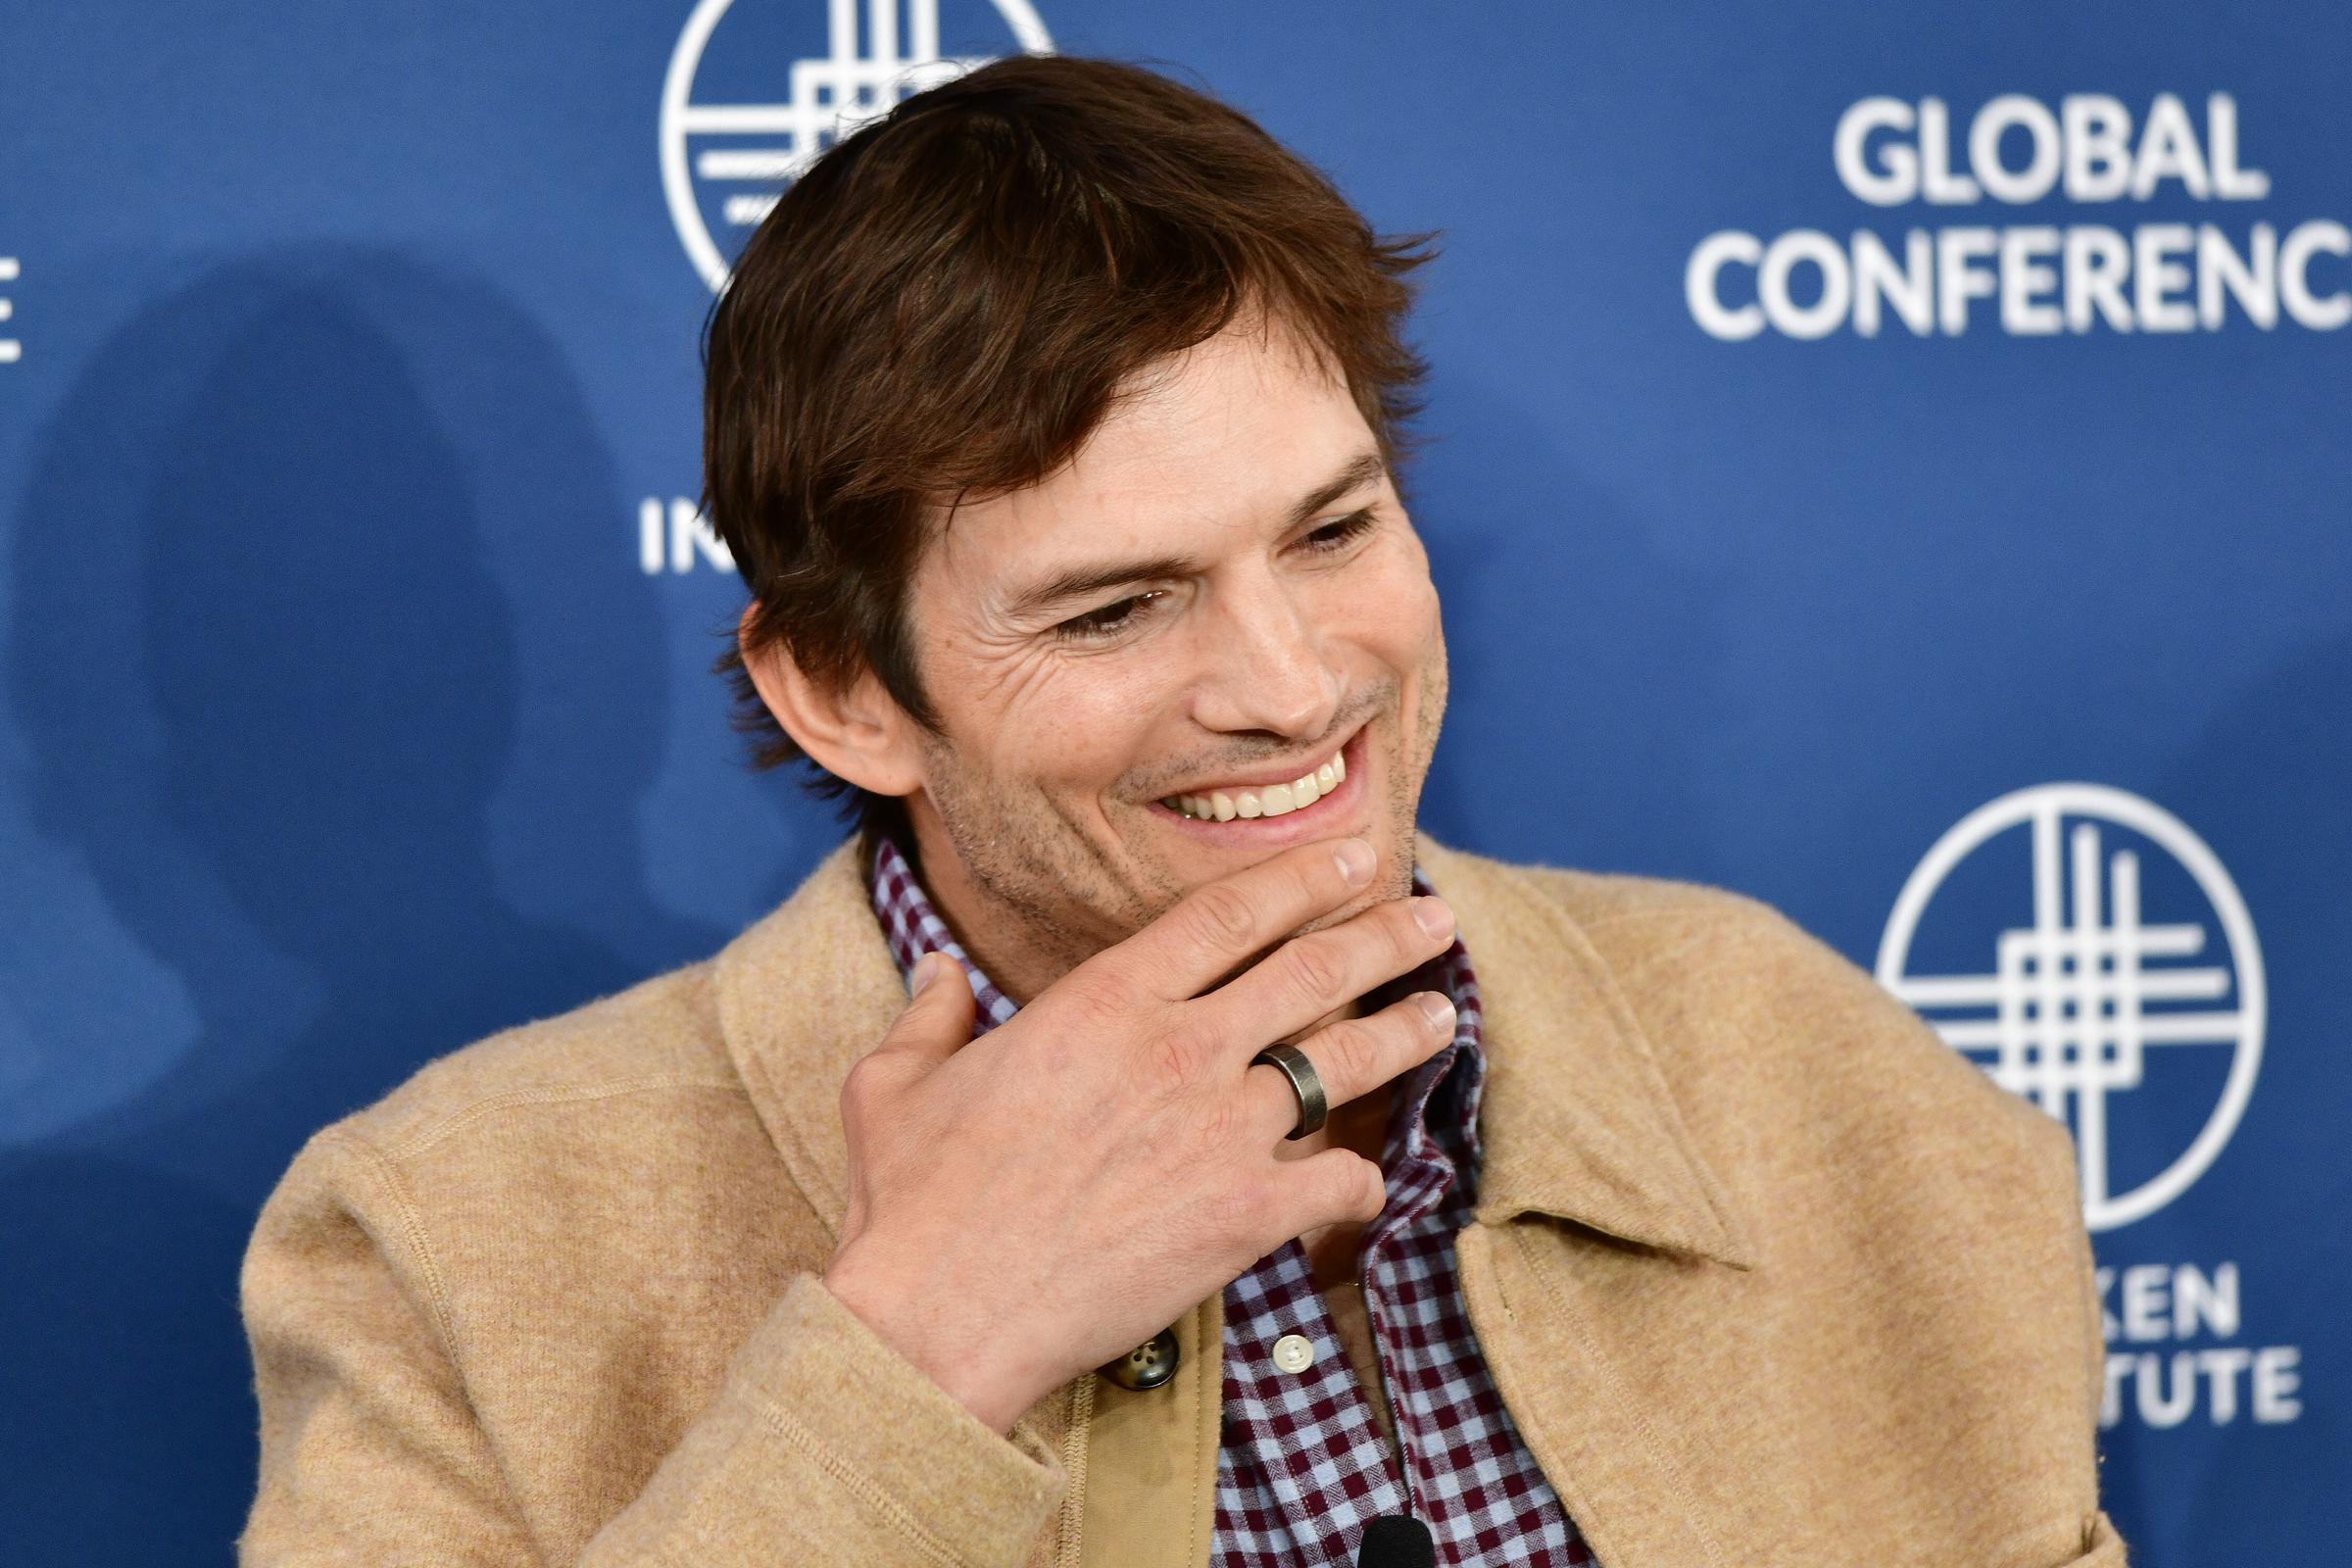 Ashton Kutcher attends the Milken Institute Global Conference in Beverly Hills, California, on May 1, 2023. | Source: Getty Images